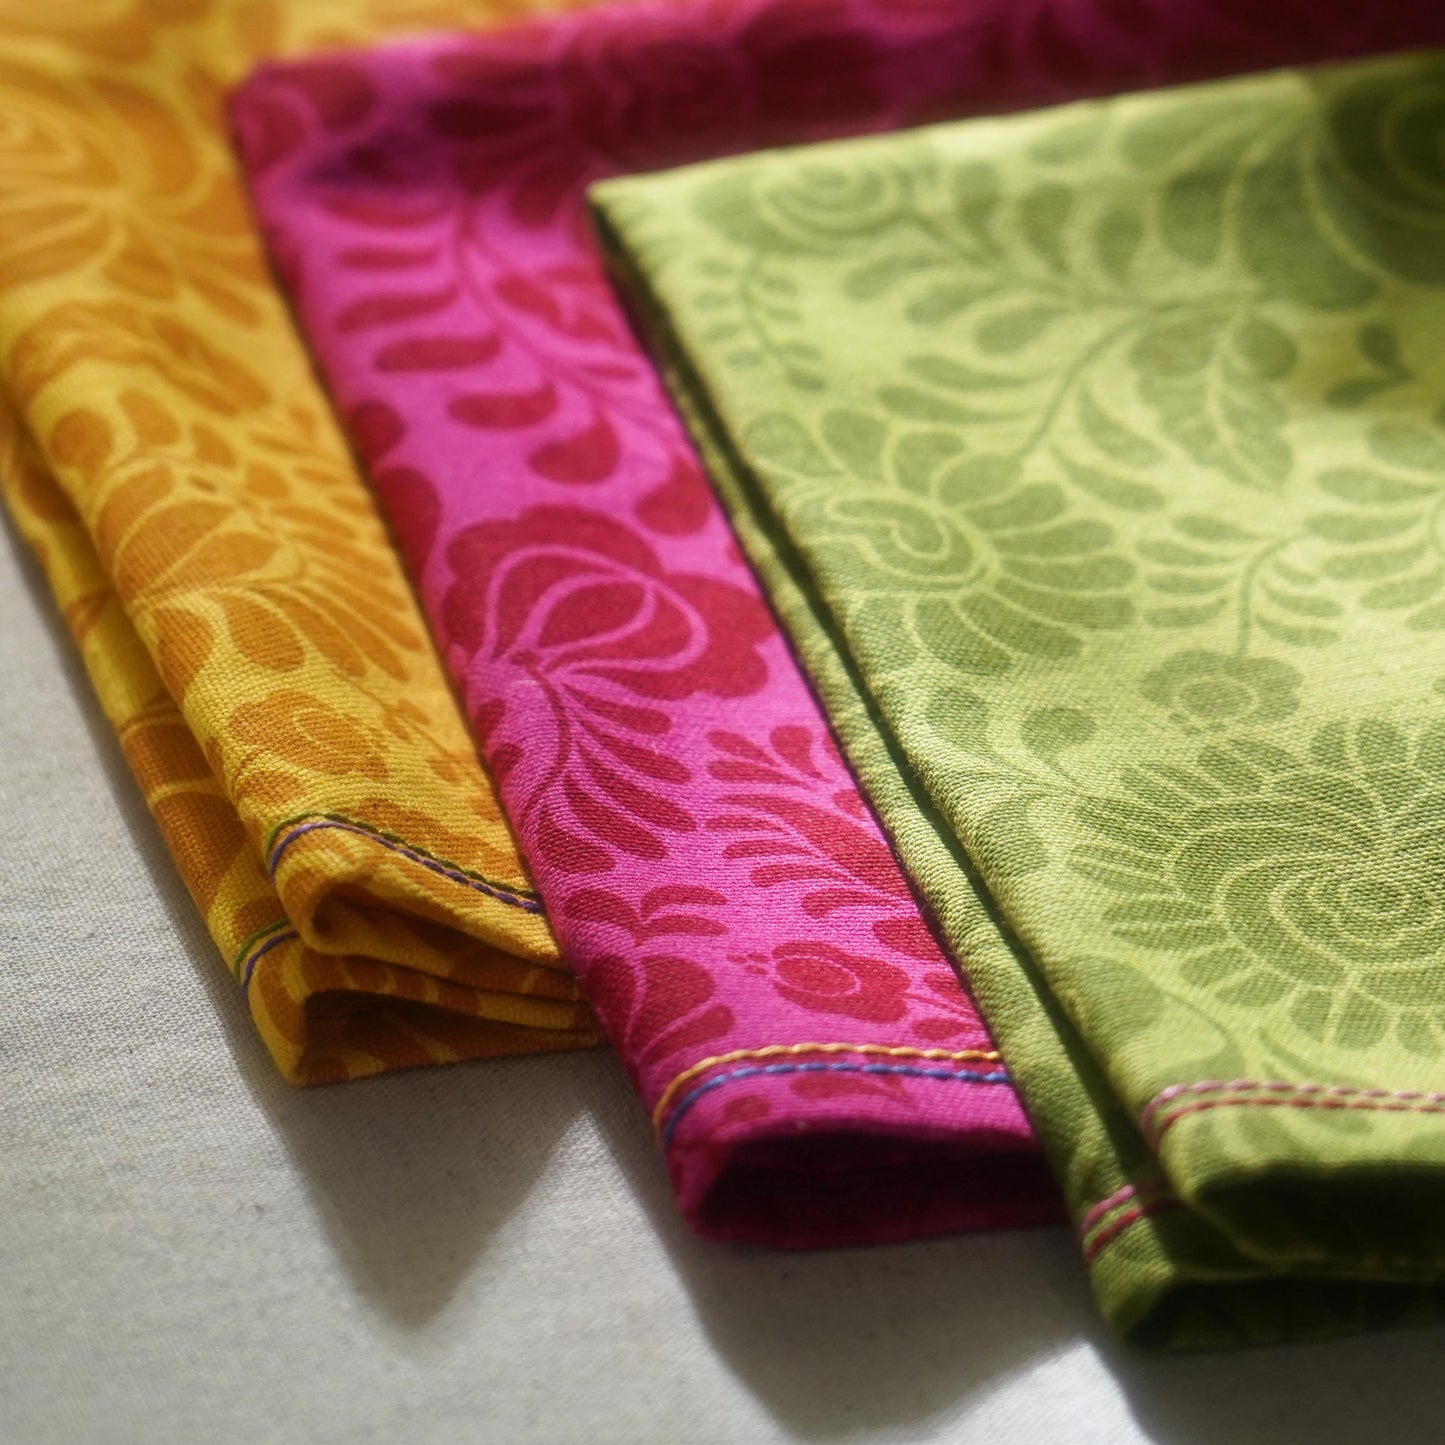 MATYO - Green colour Napkin, floral print cotton fabric, size available